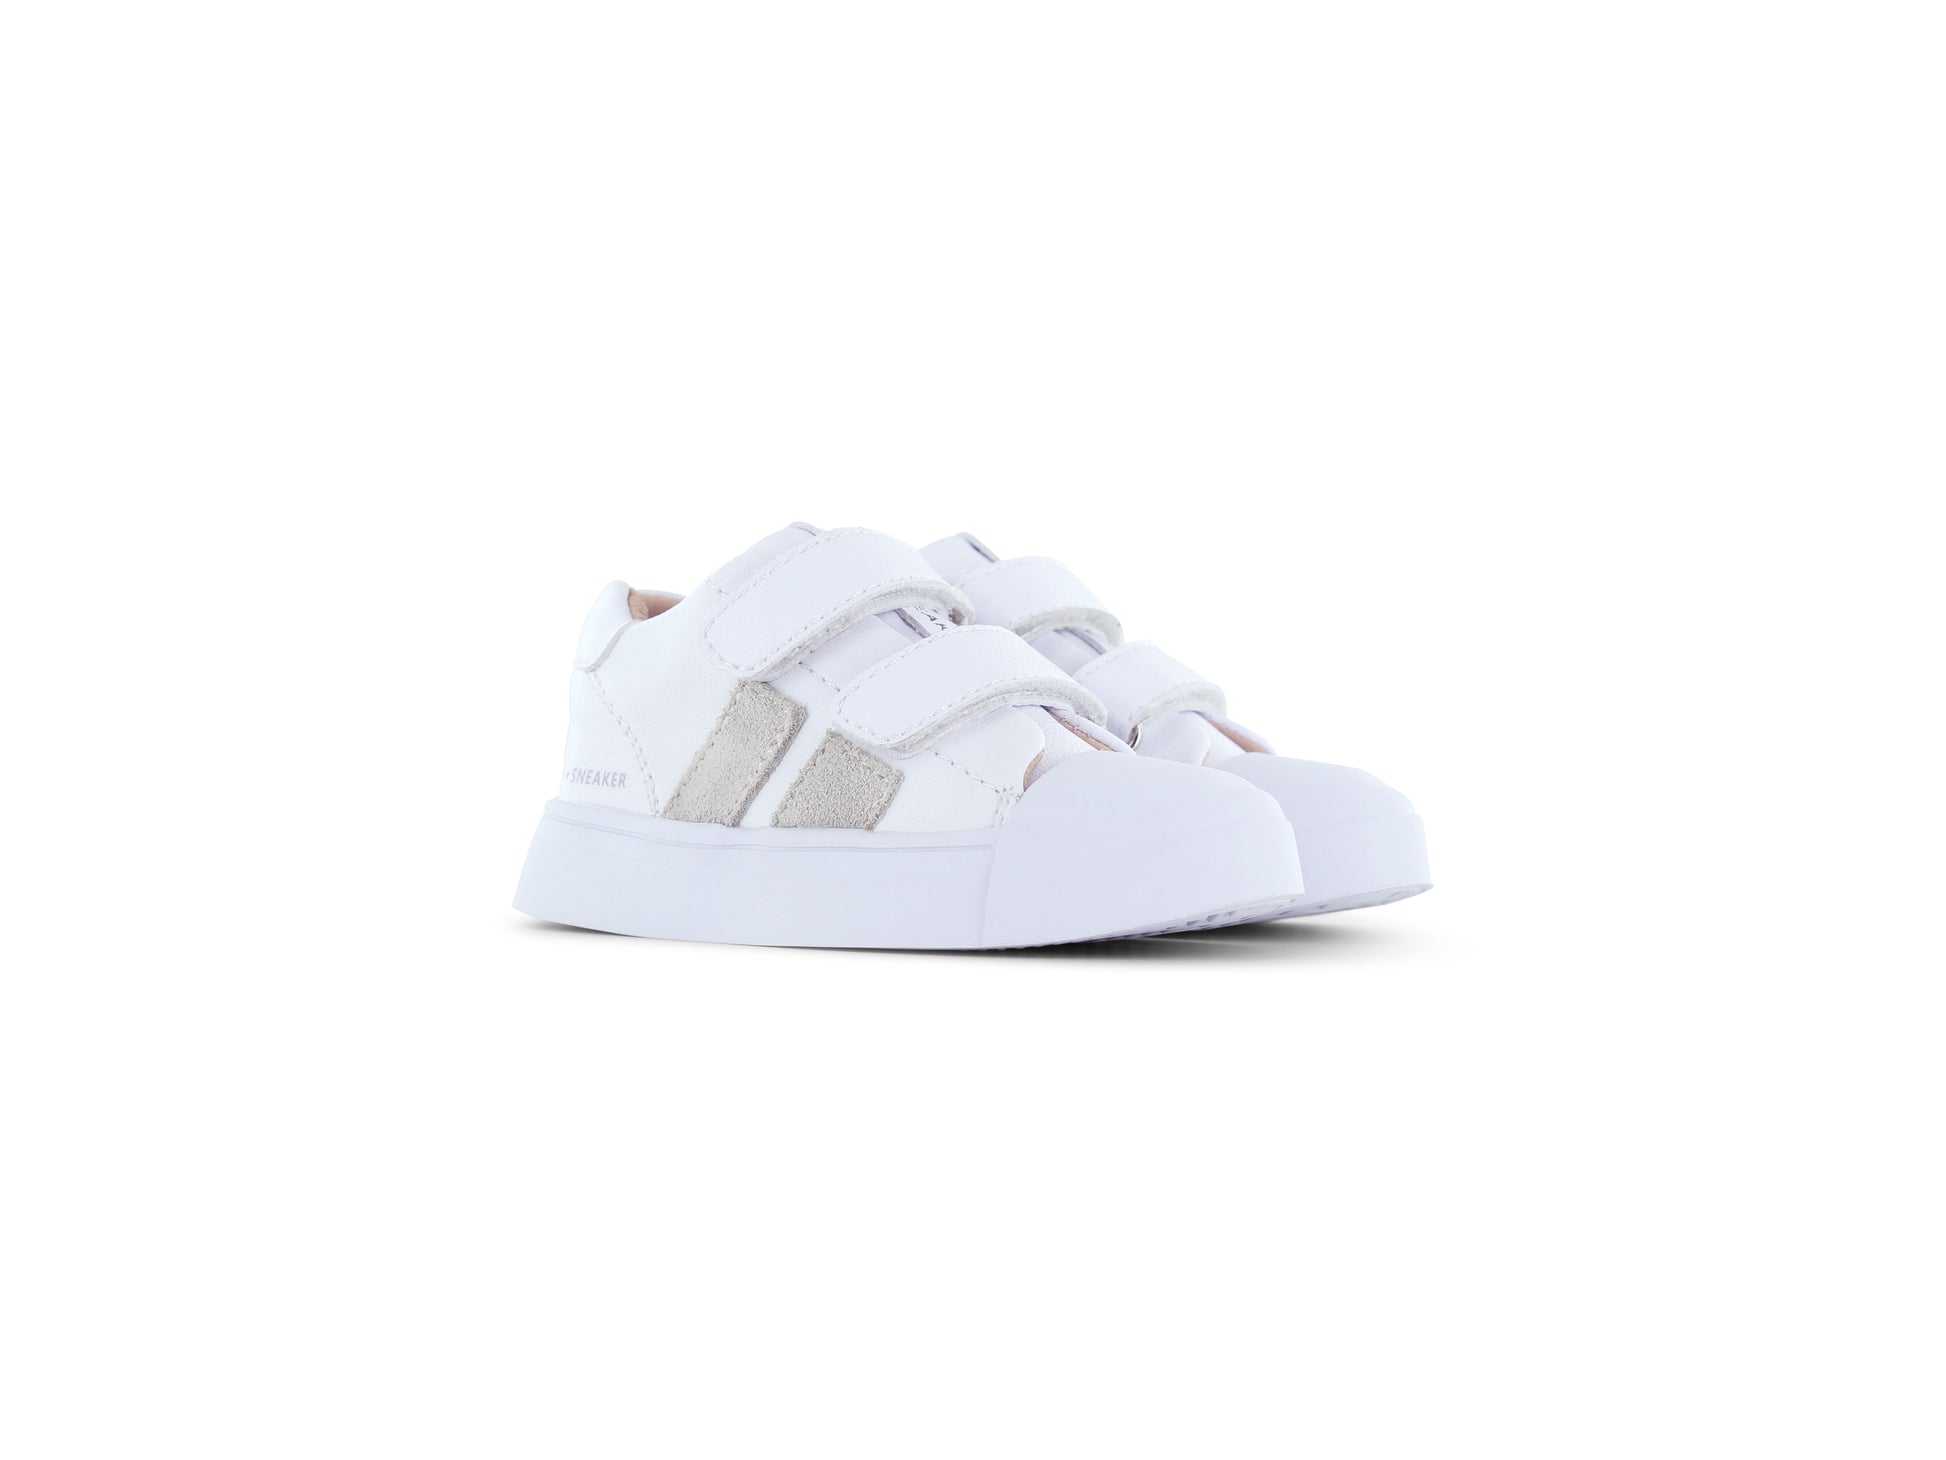 A pair of chunky girl's trainer's by Shoesme, style SH24S005-C, in white leather with grey panels to side.
Double velcro fastening.
Right side view.